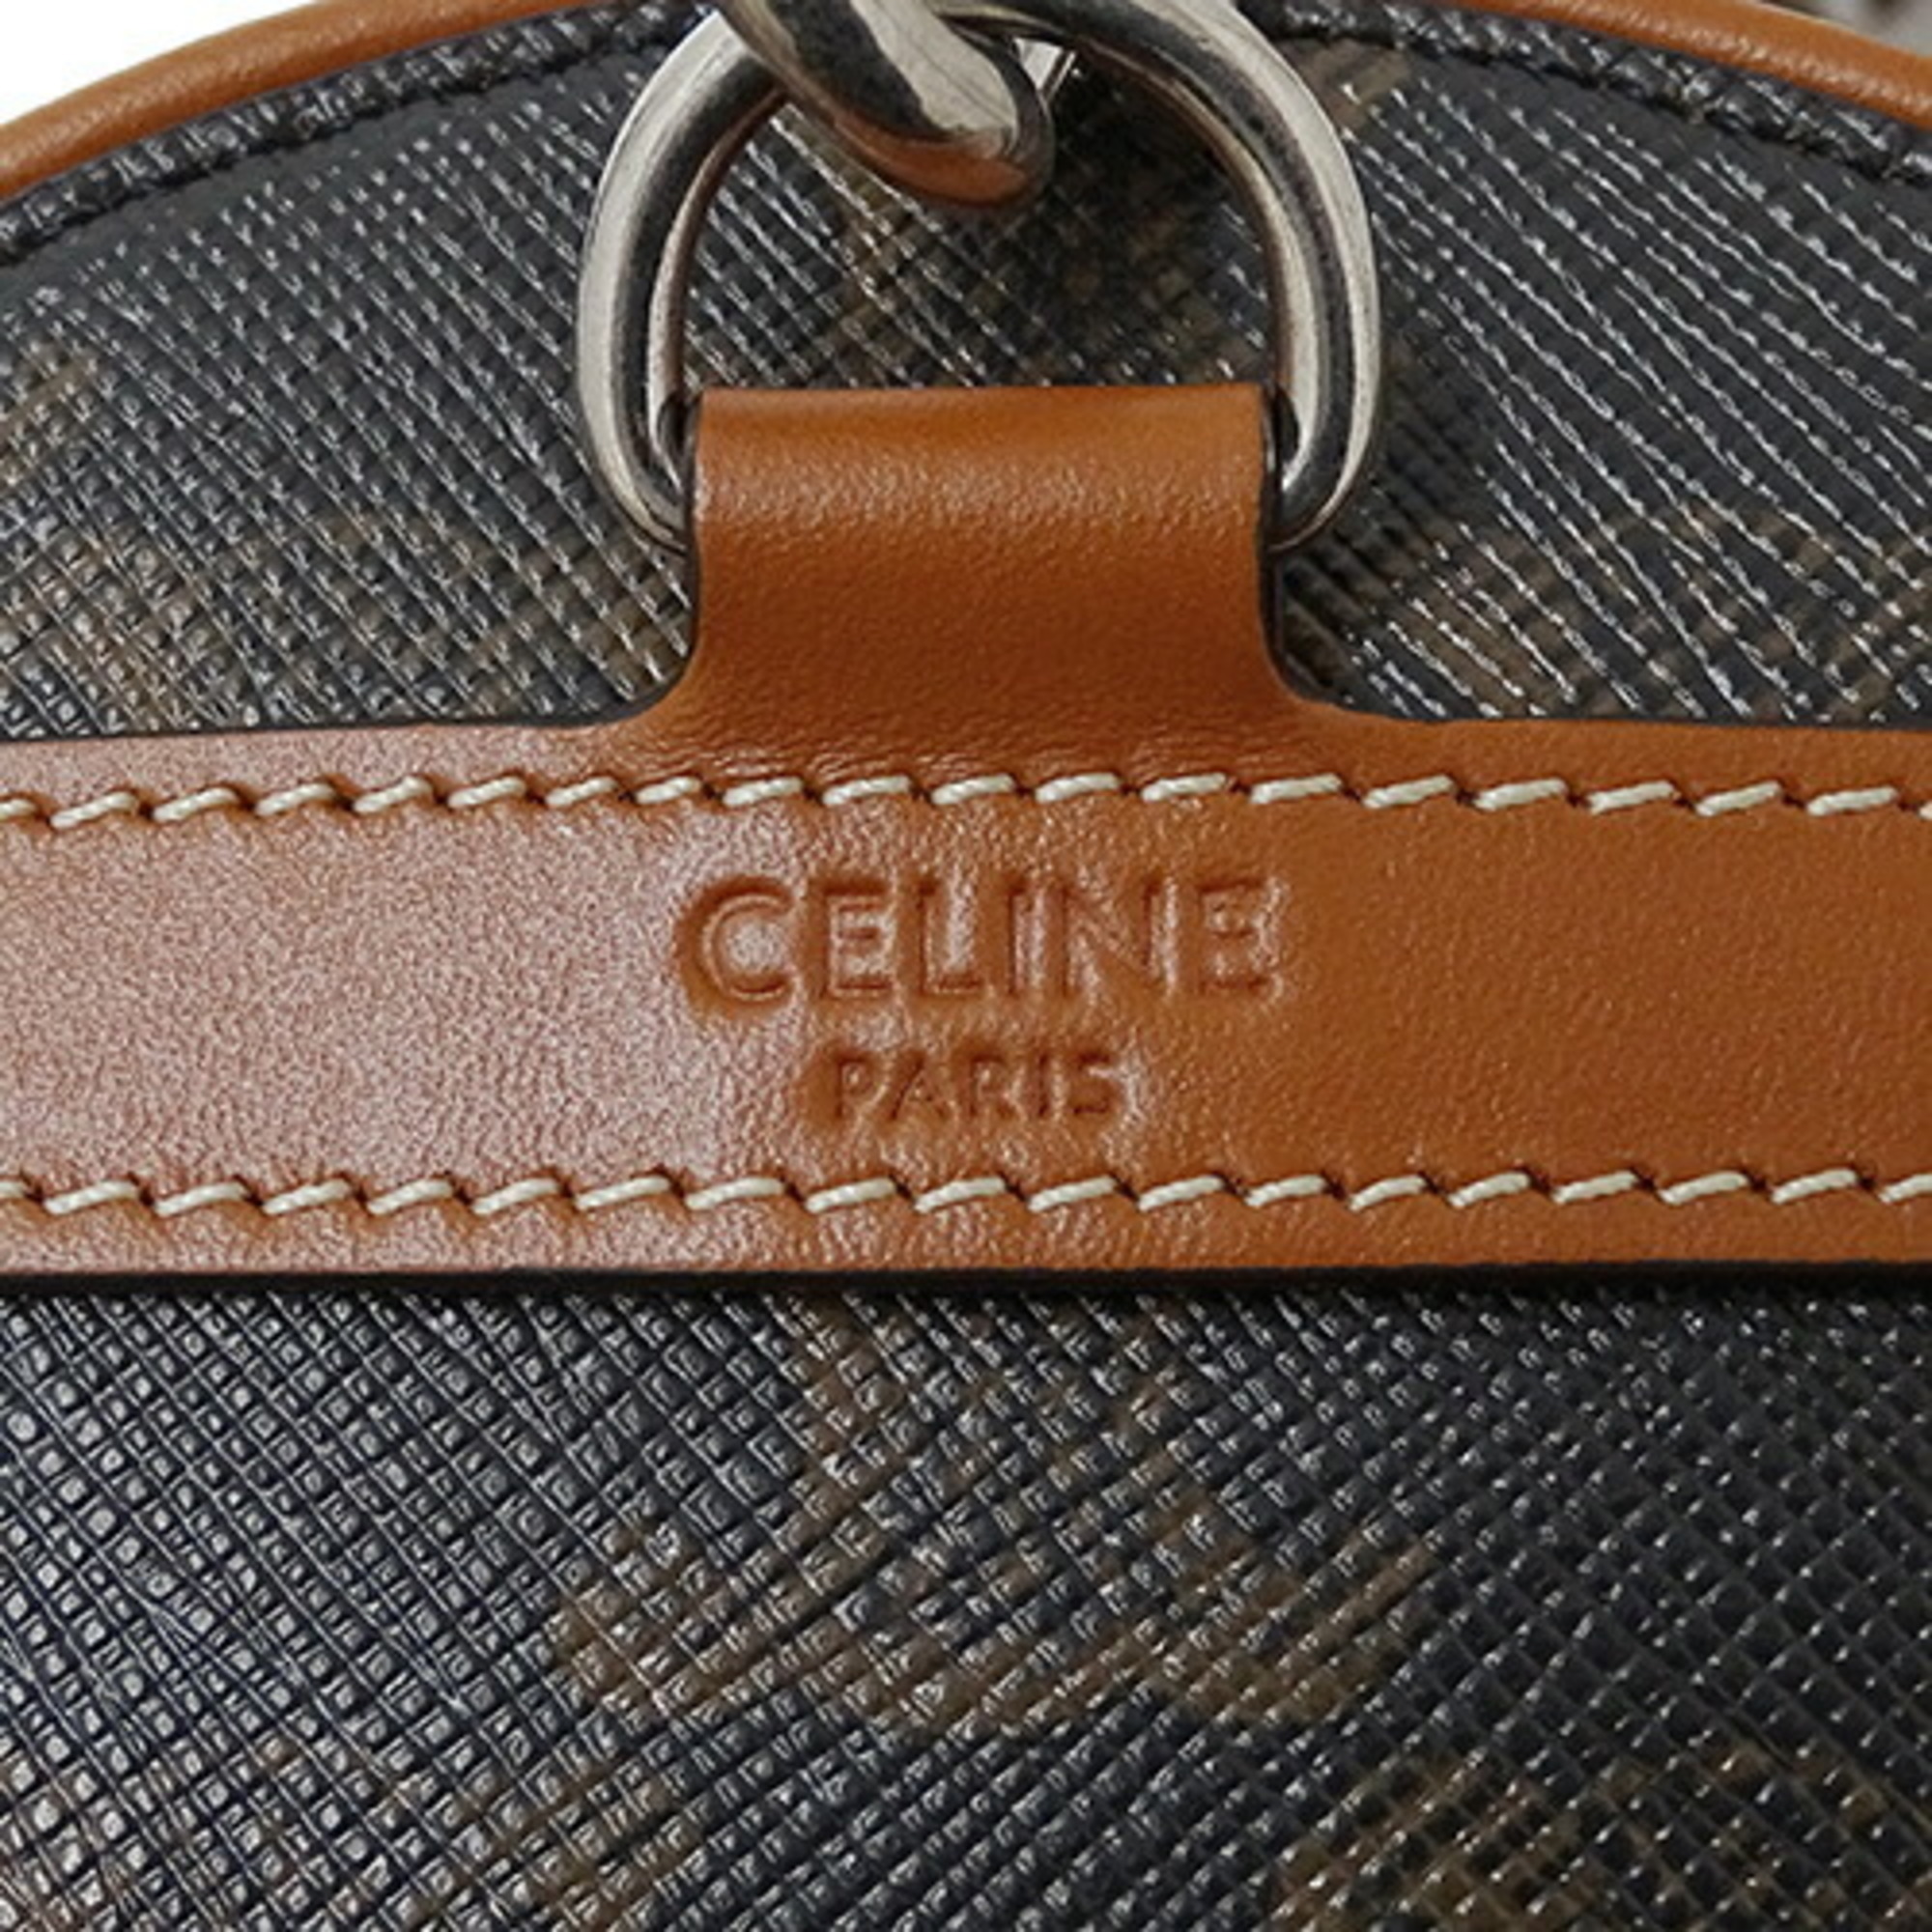 CELINE Bags for Women, Shoulder Bags, Triomphe Cylinder Black, Brown, Compact